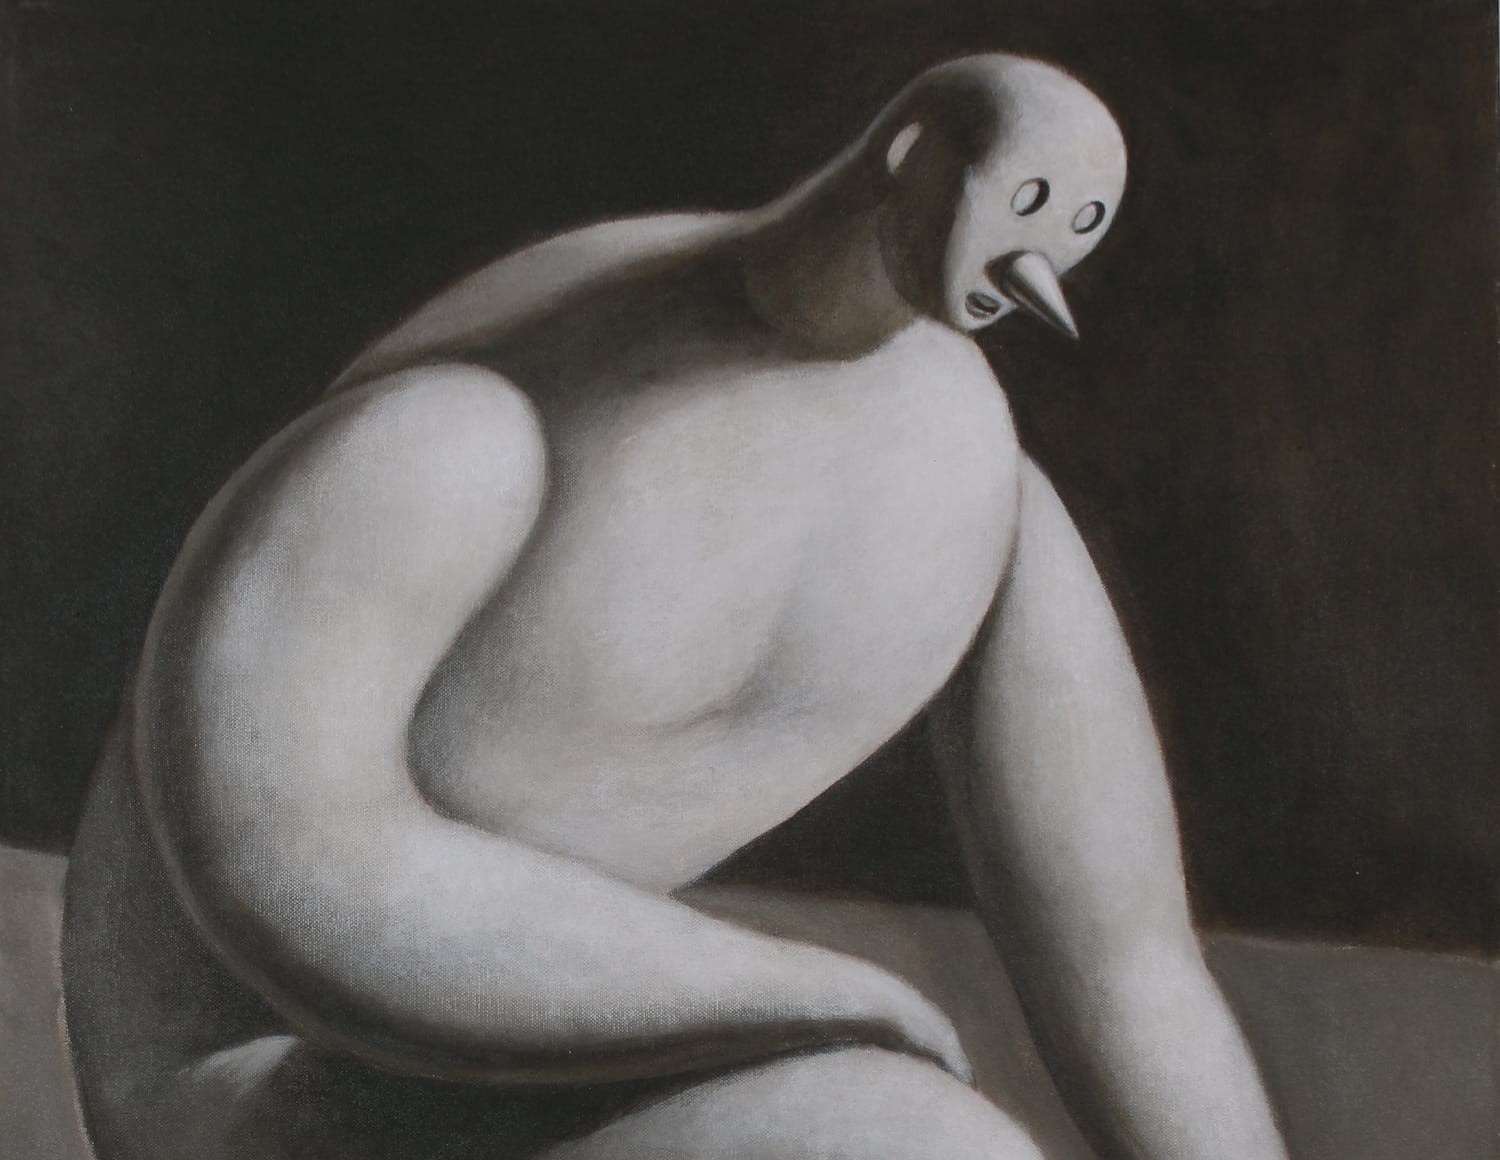 Thomas Anfield’s Solo Exhibition: New Figures